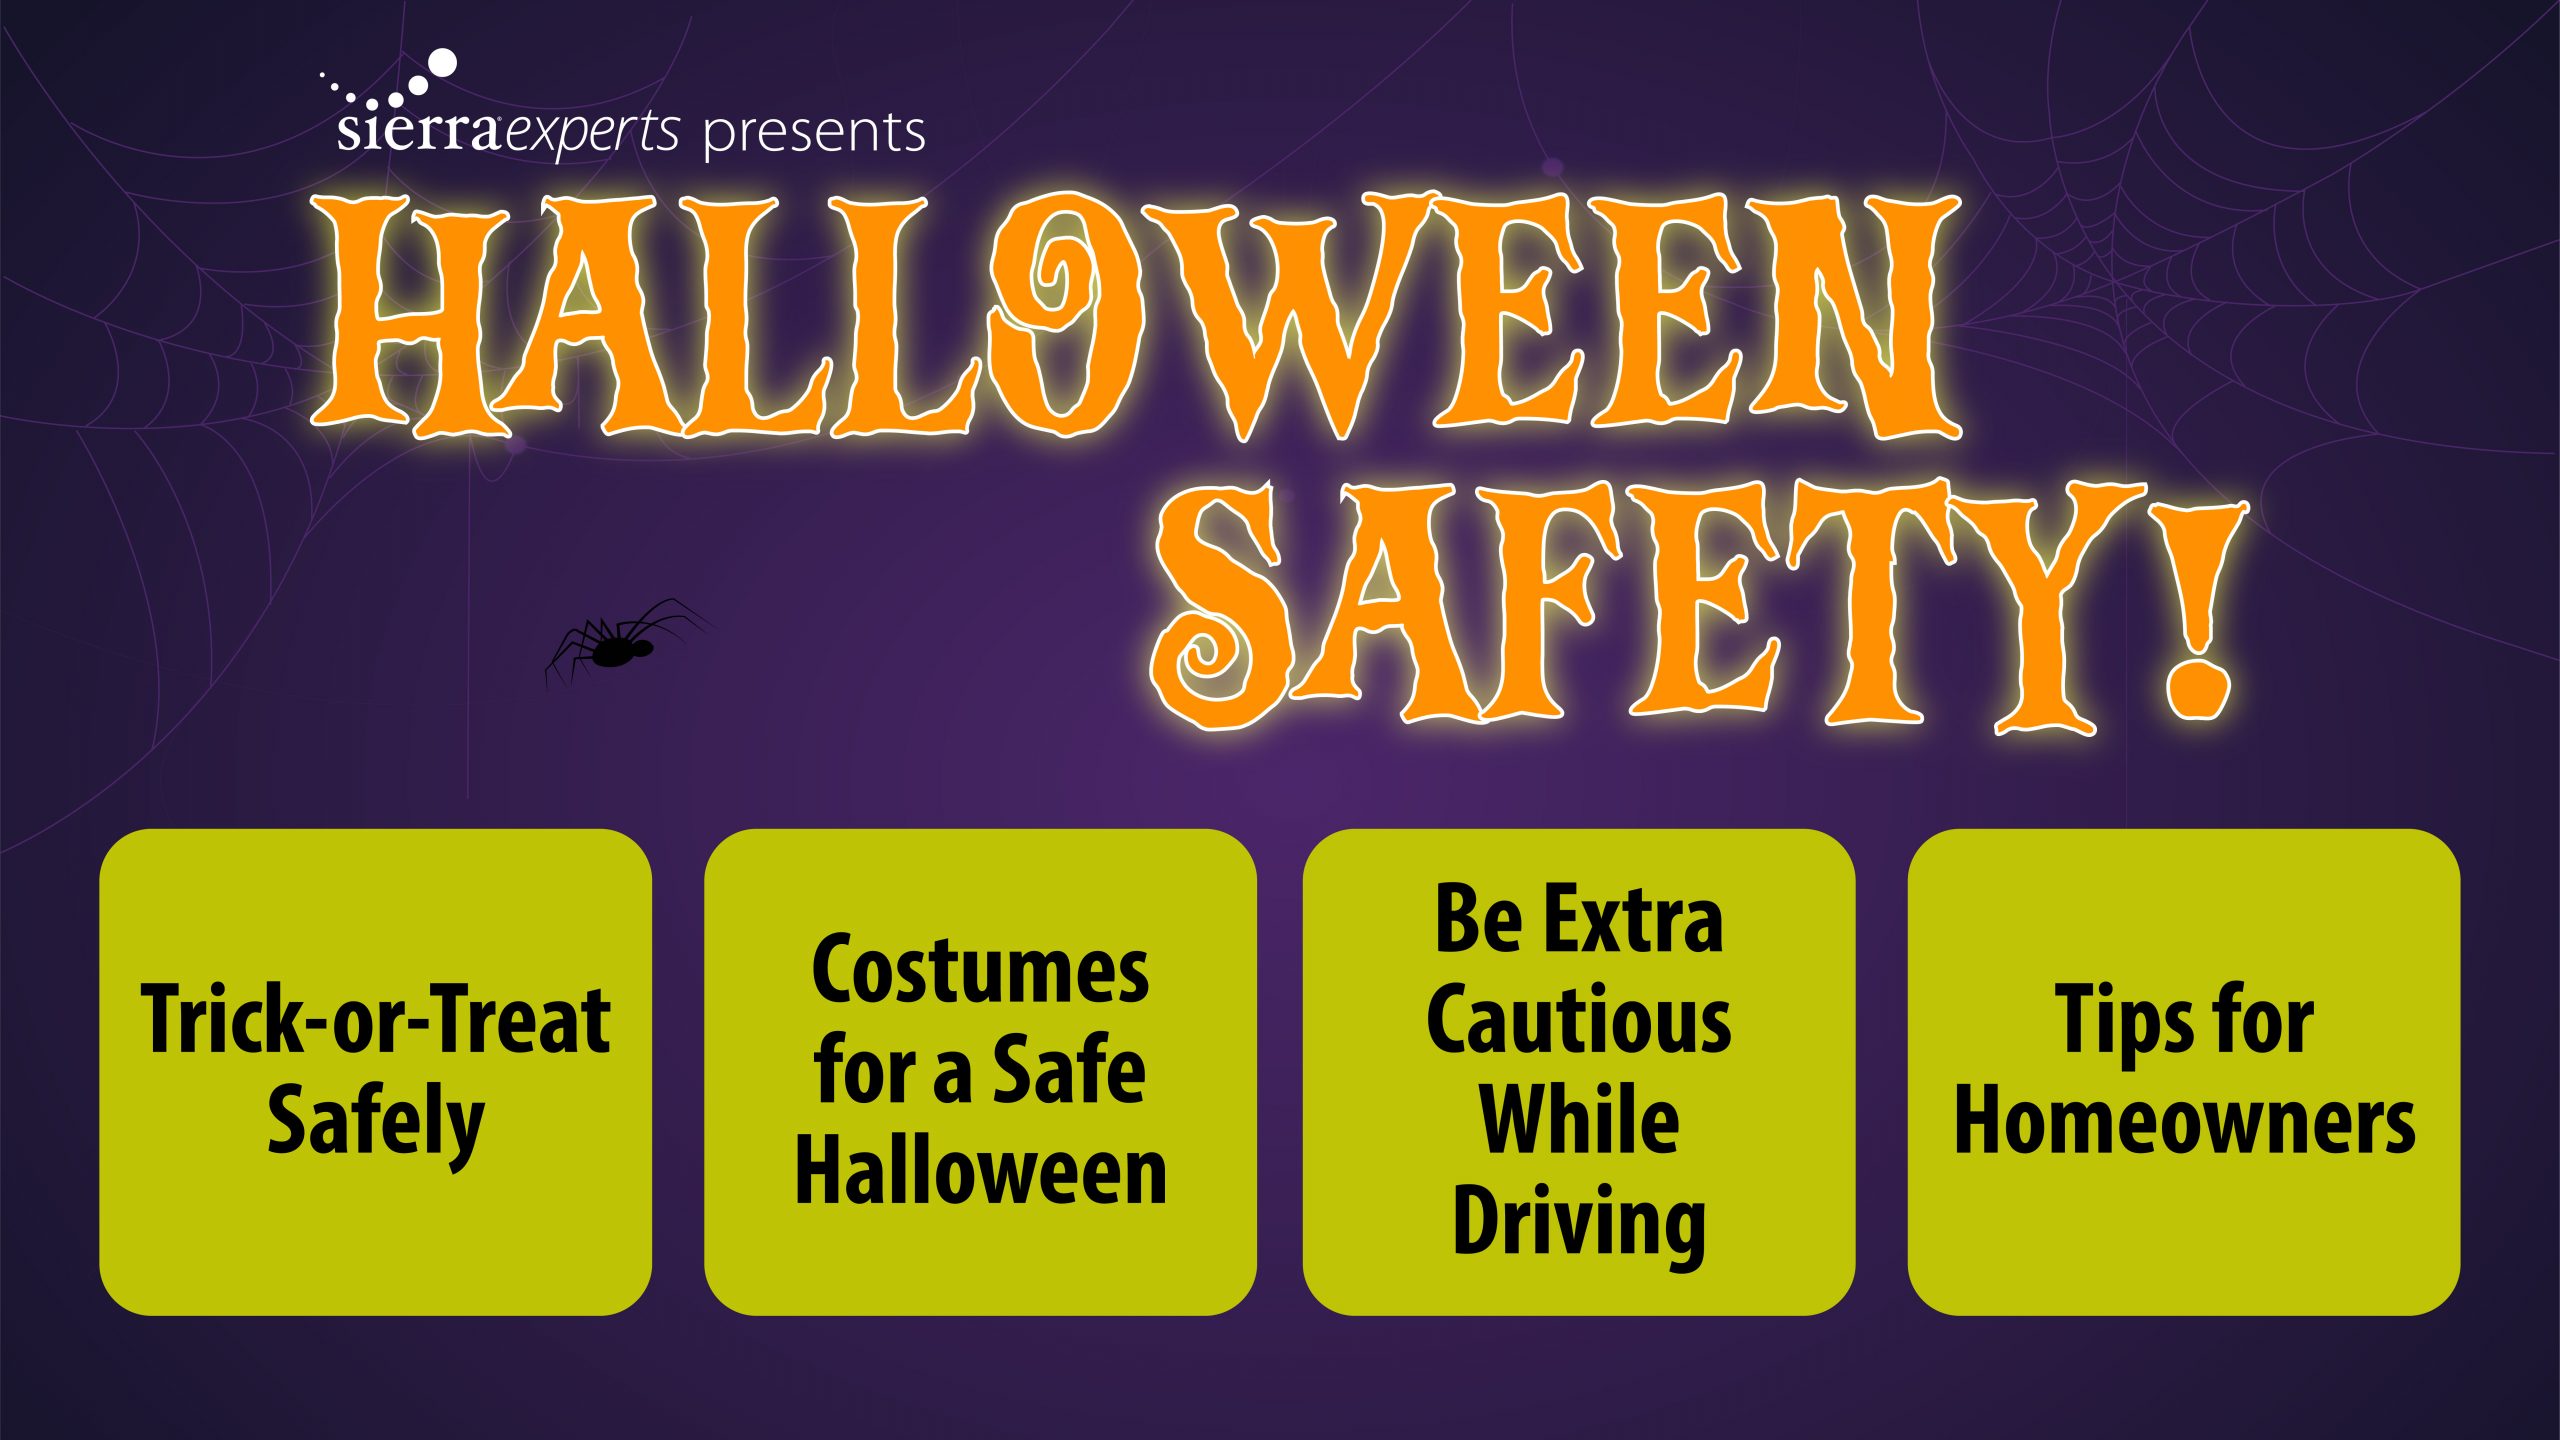 Halloween Safety image with 4 safety tips